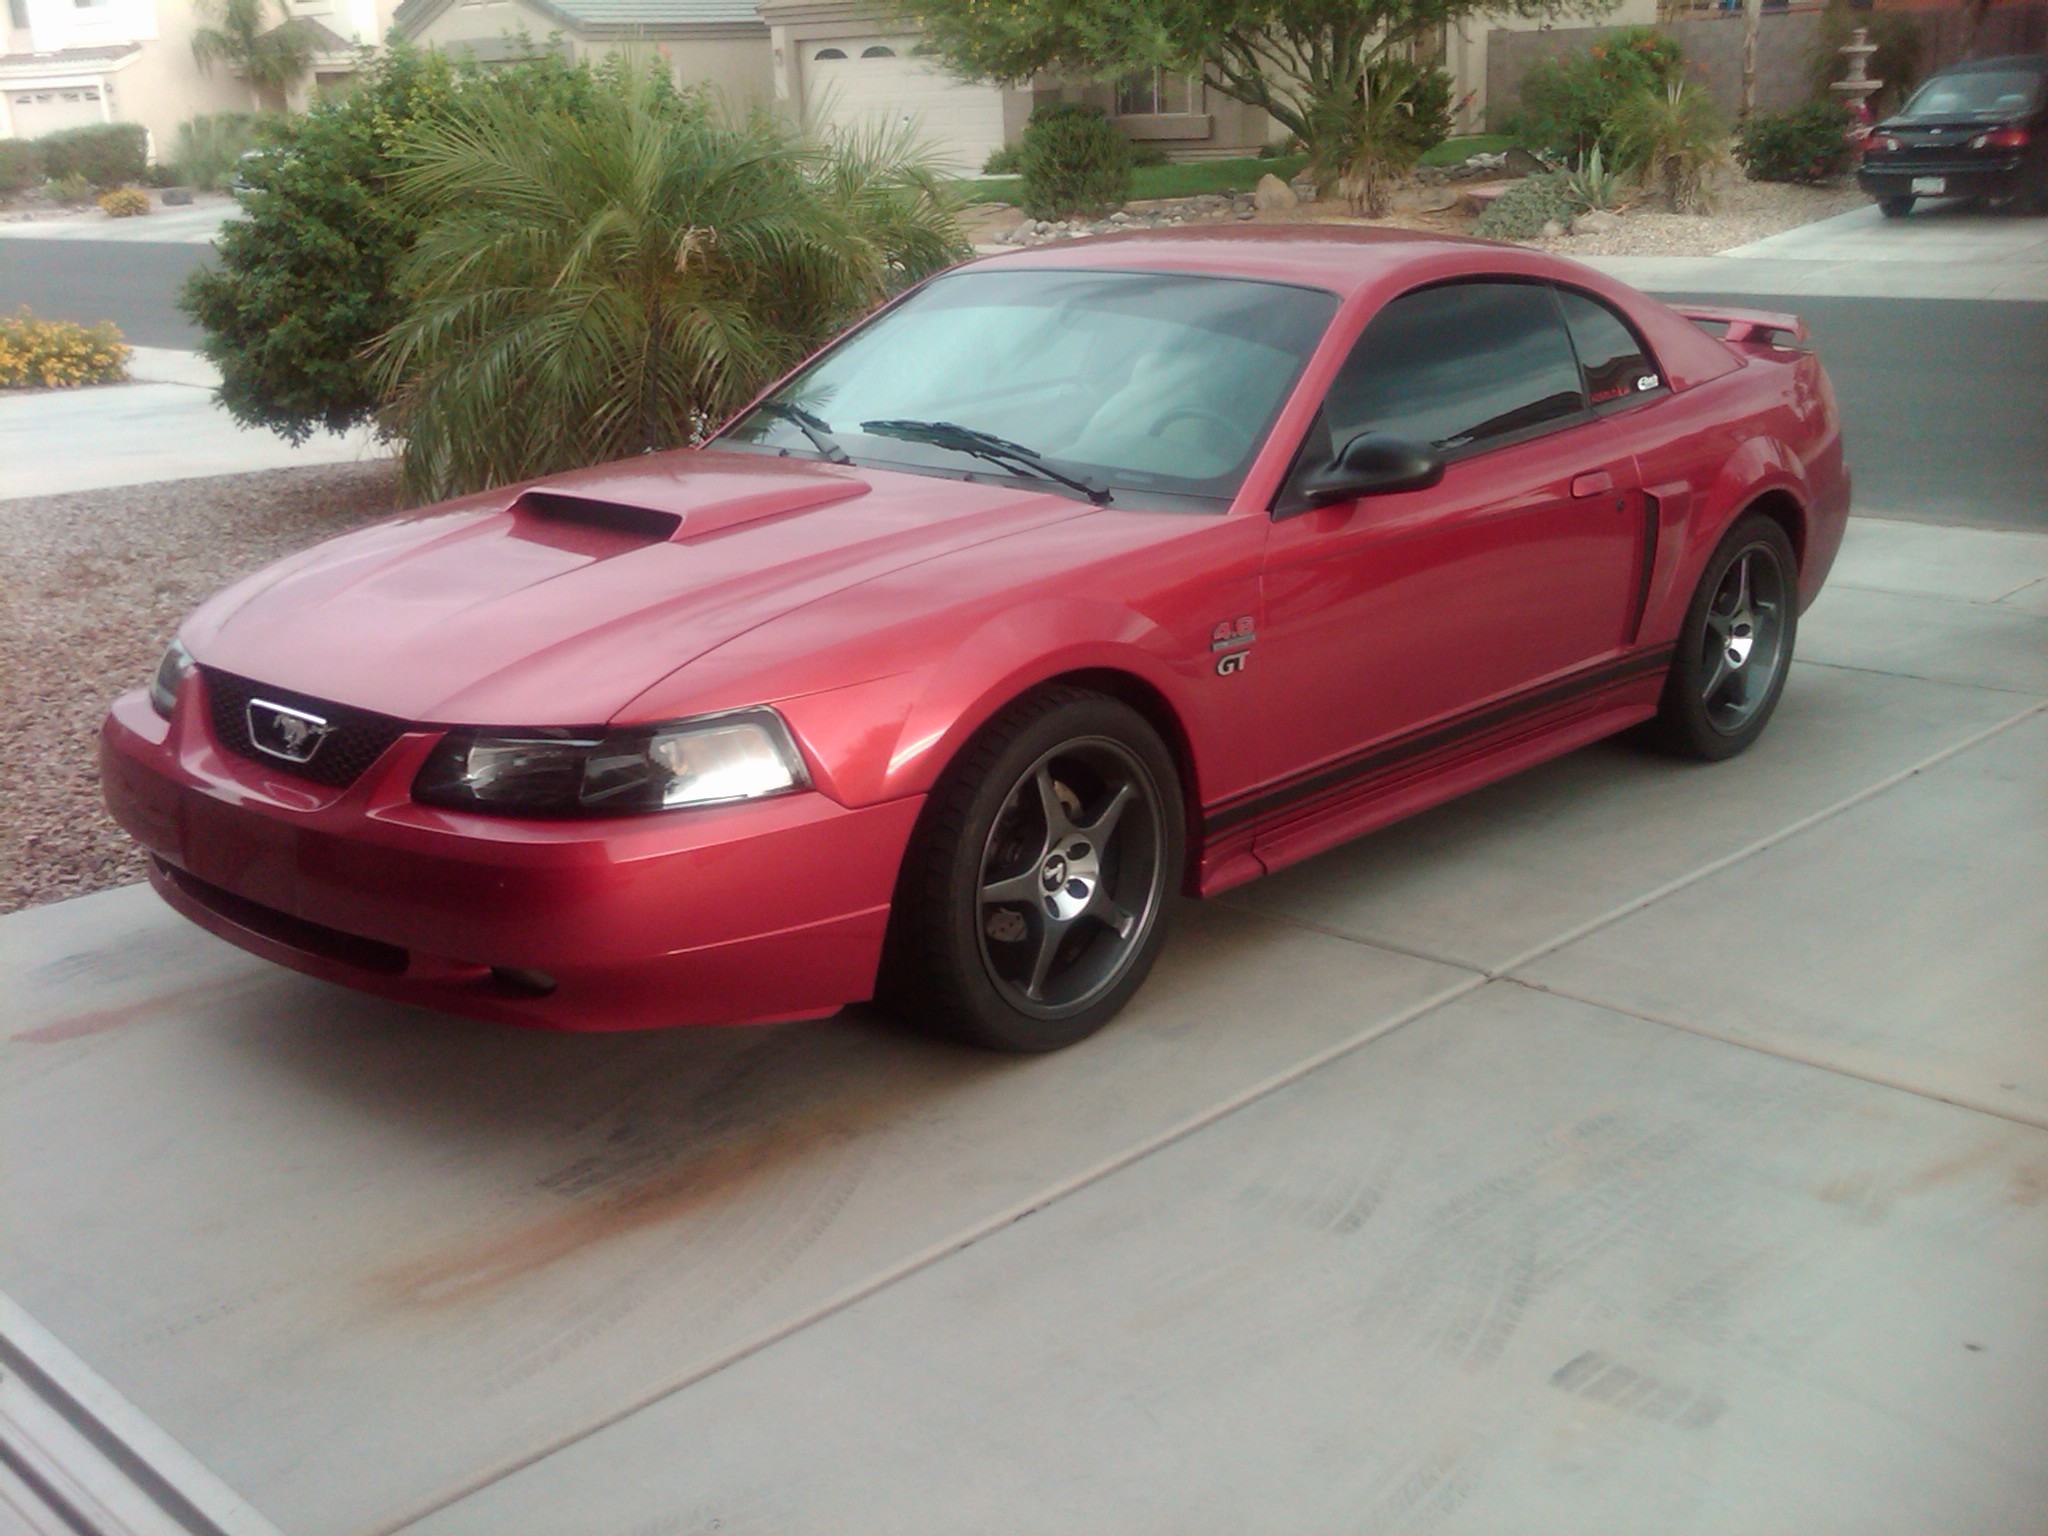 2001 Ford mustang 0-60 times